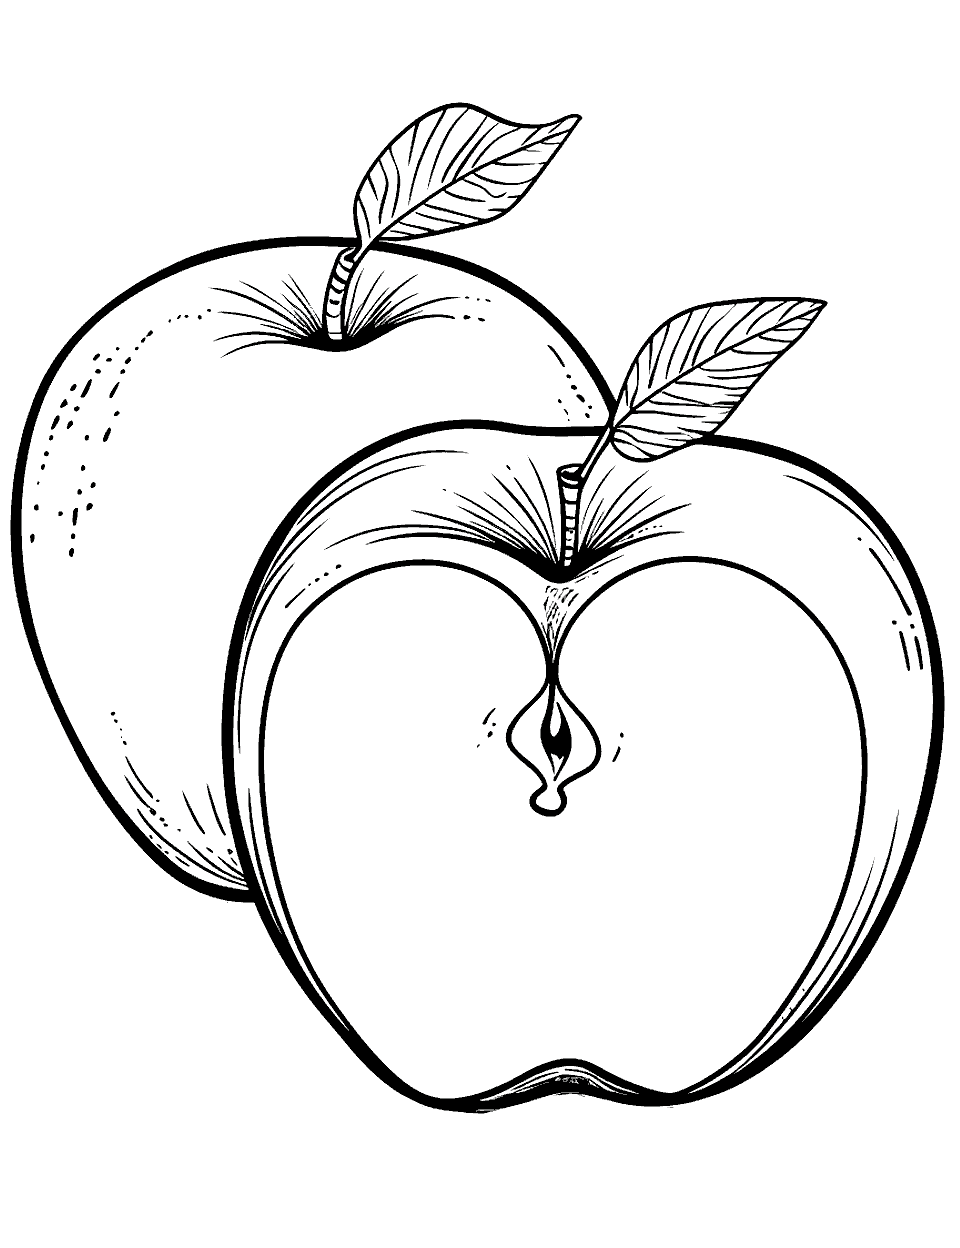 Apple Slice Coloring Page - An apple next to a sliced piece, showing the inside and seeds.